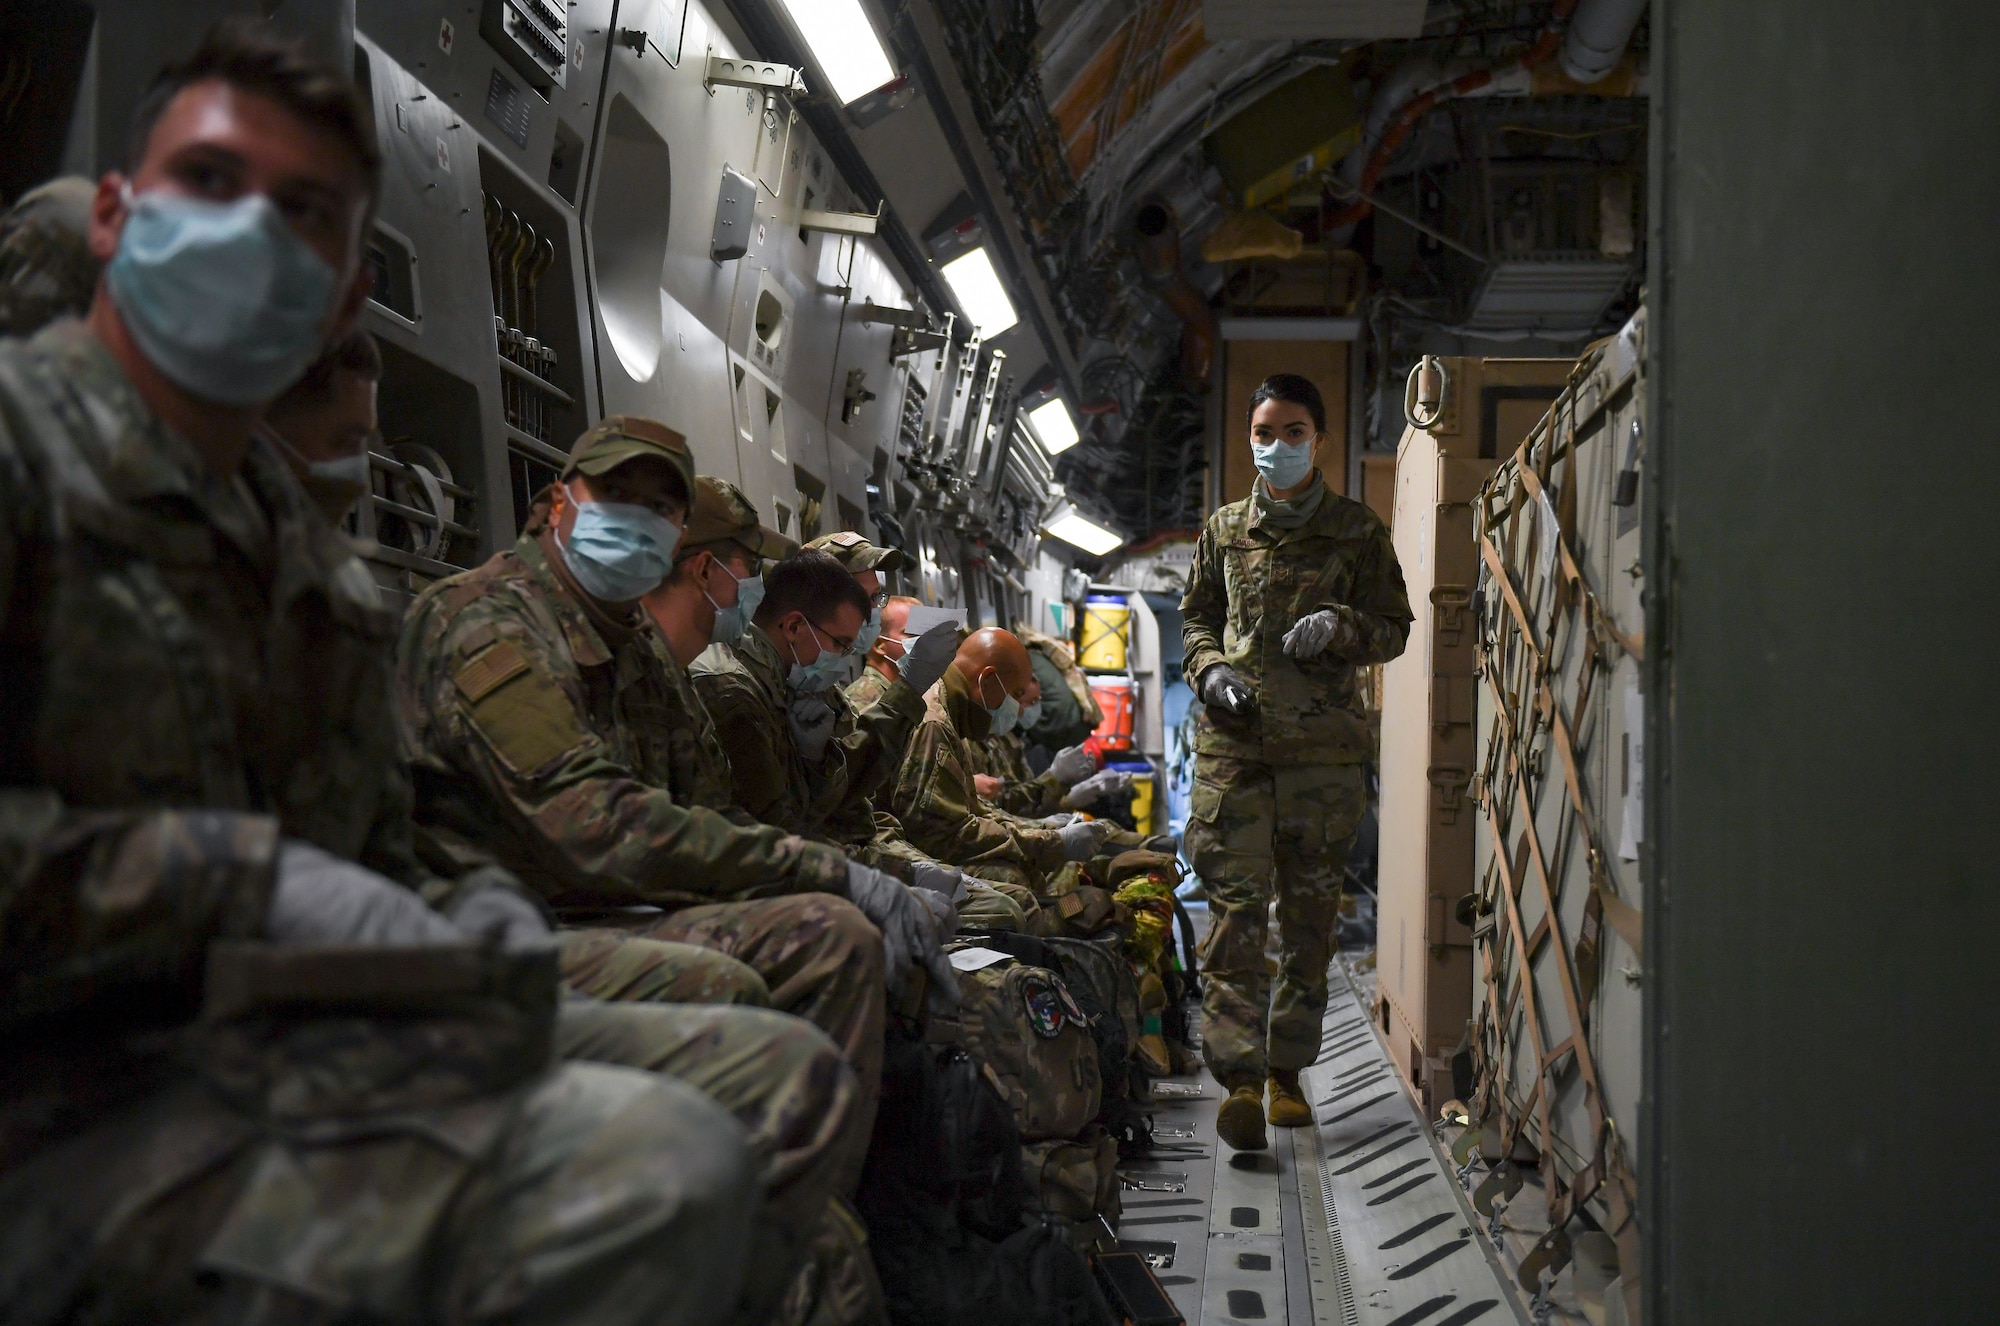 An Airman walking past other Airmen in a plane.